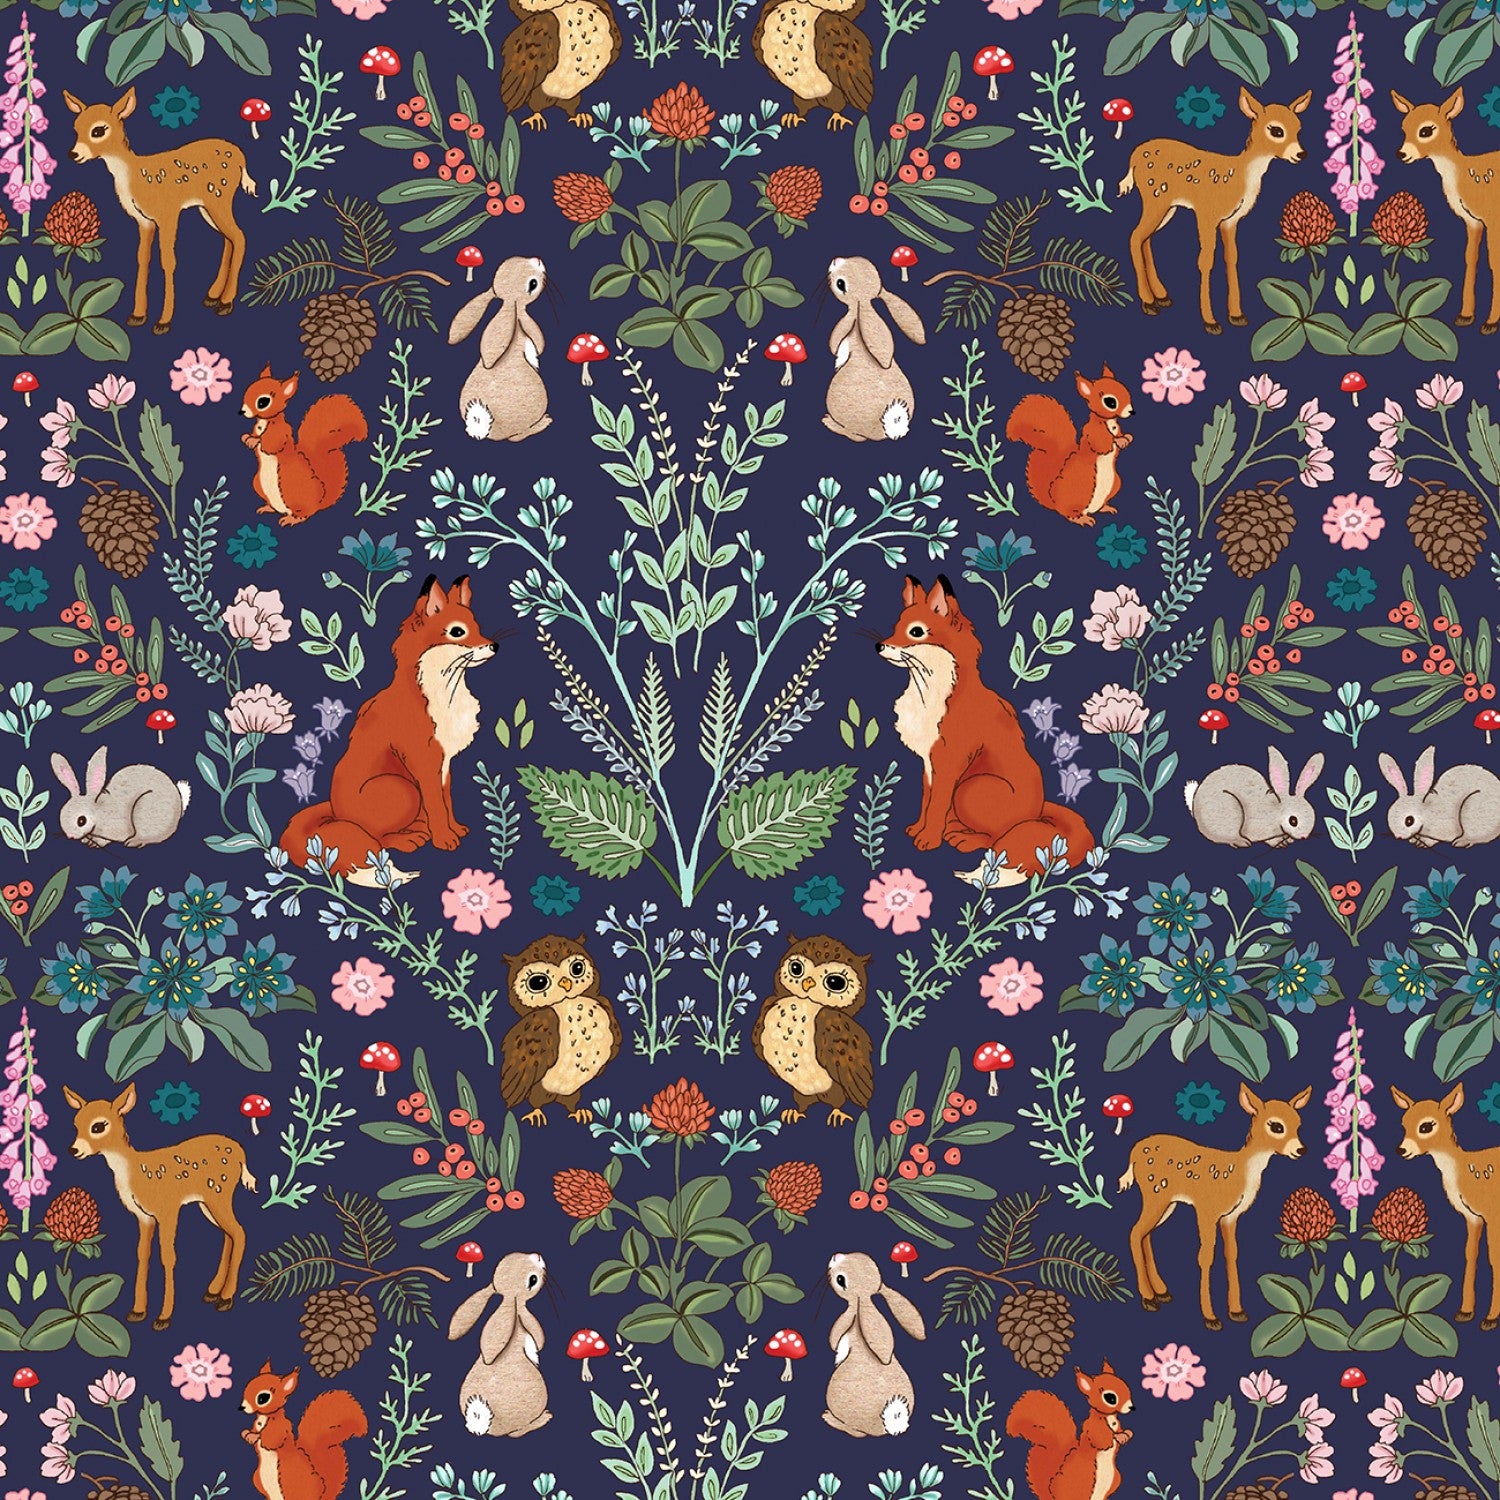 Midnight Forest - Forest Adventure Navy by Belle & Boo for Michael Miller